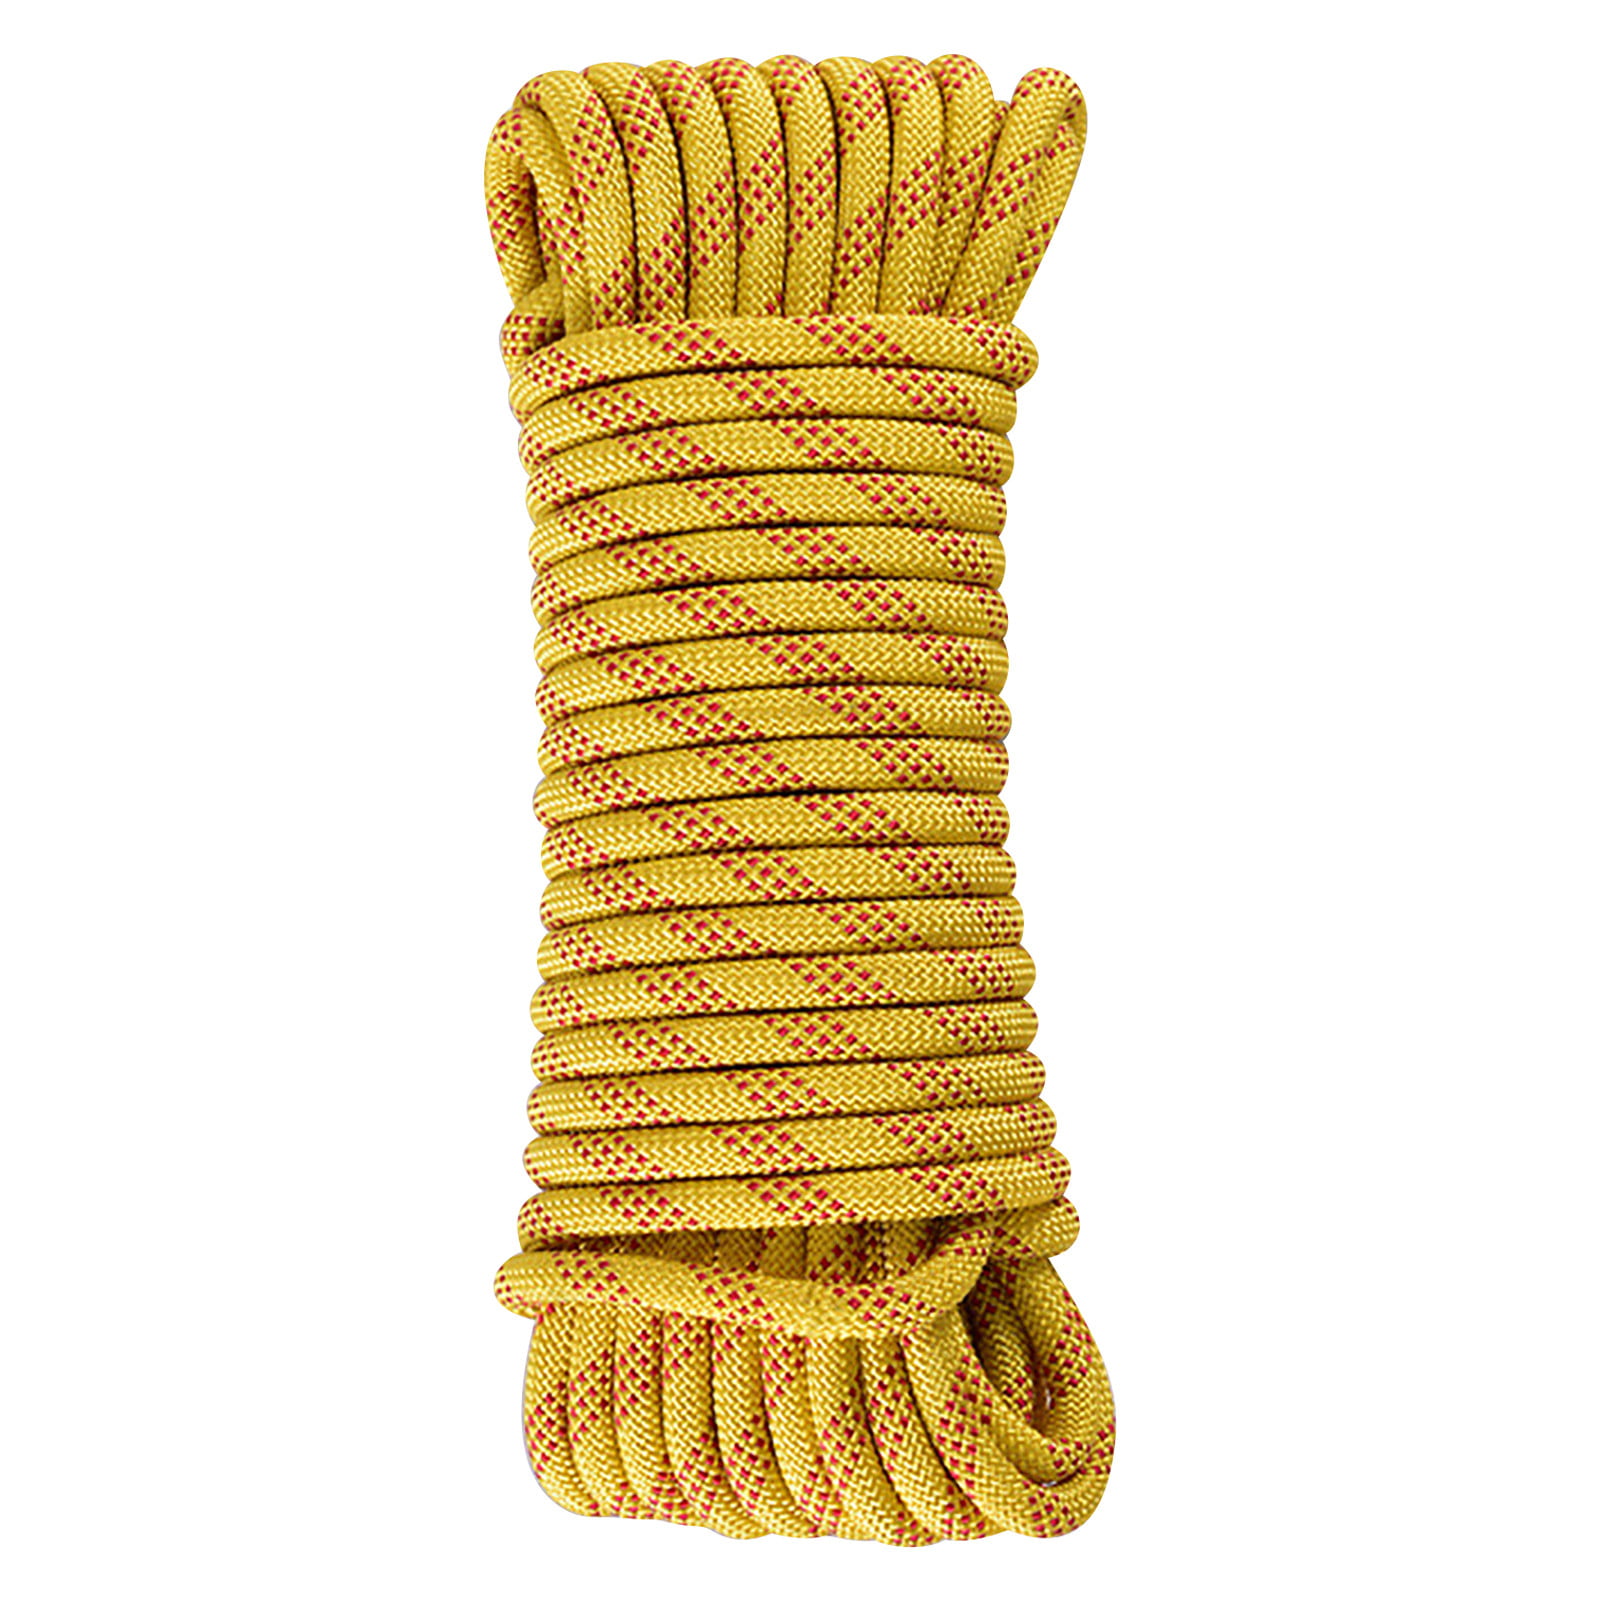 YELLOW POLYPROPYLENE ROPE BRAIDED POLY CORD STRONG STRING CAMPING SAILING YACHT 